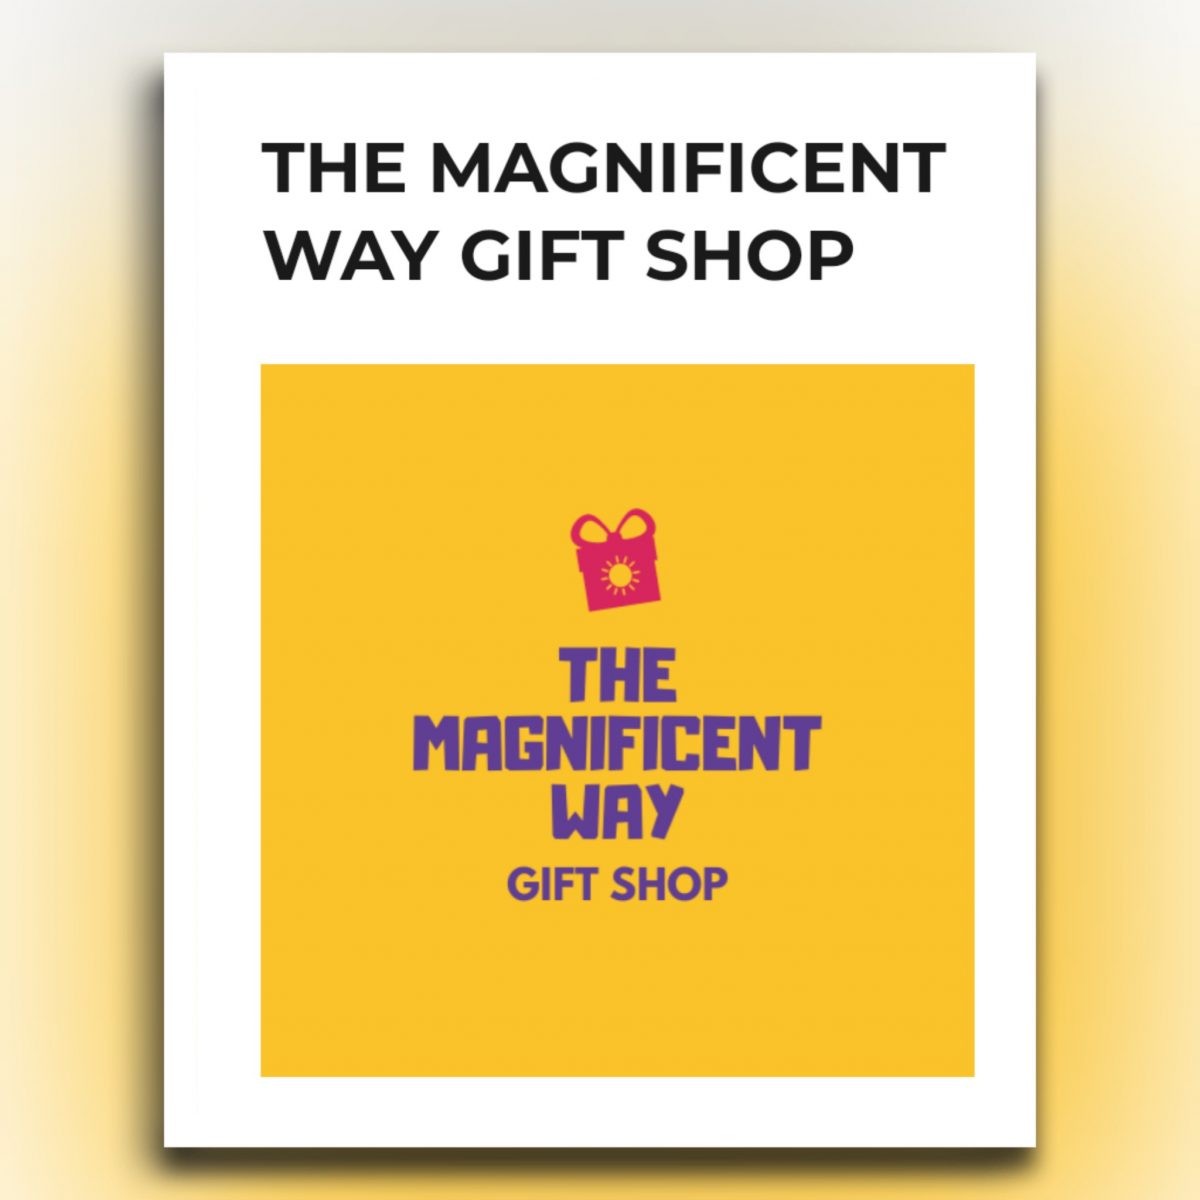 THE MAGNIFICENT WAY GIFT SHOP